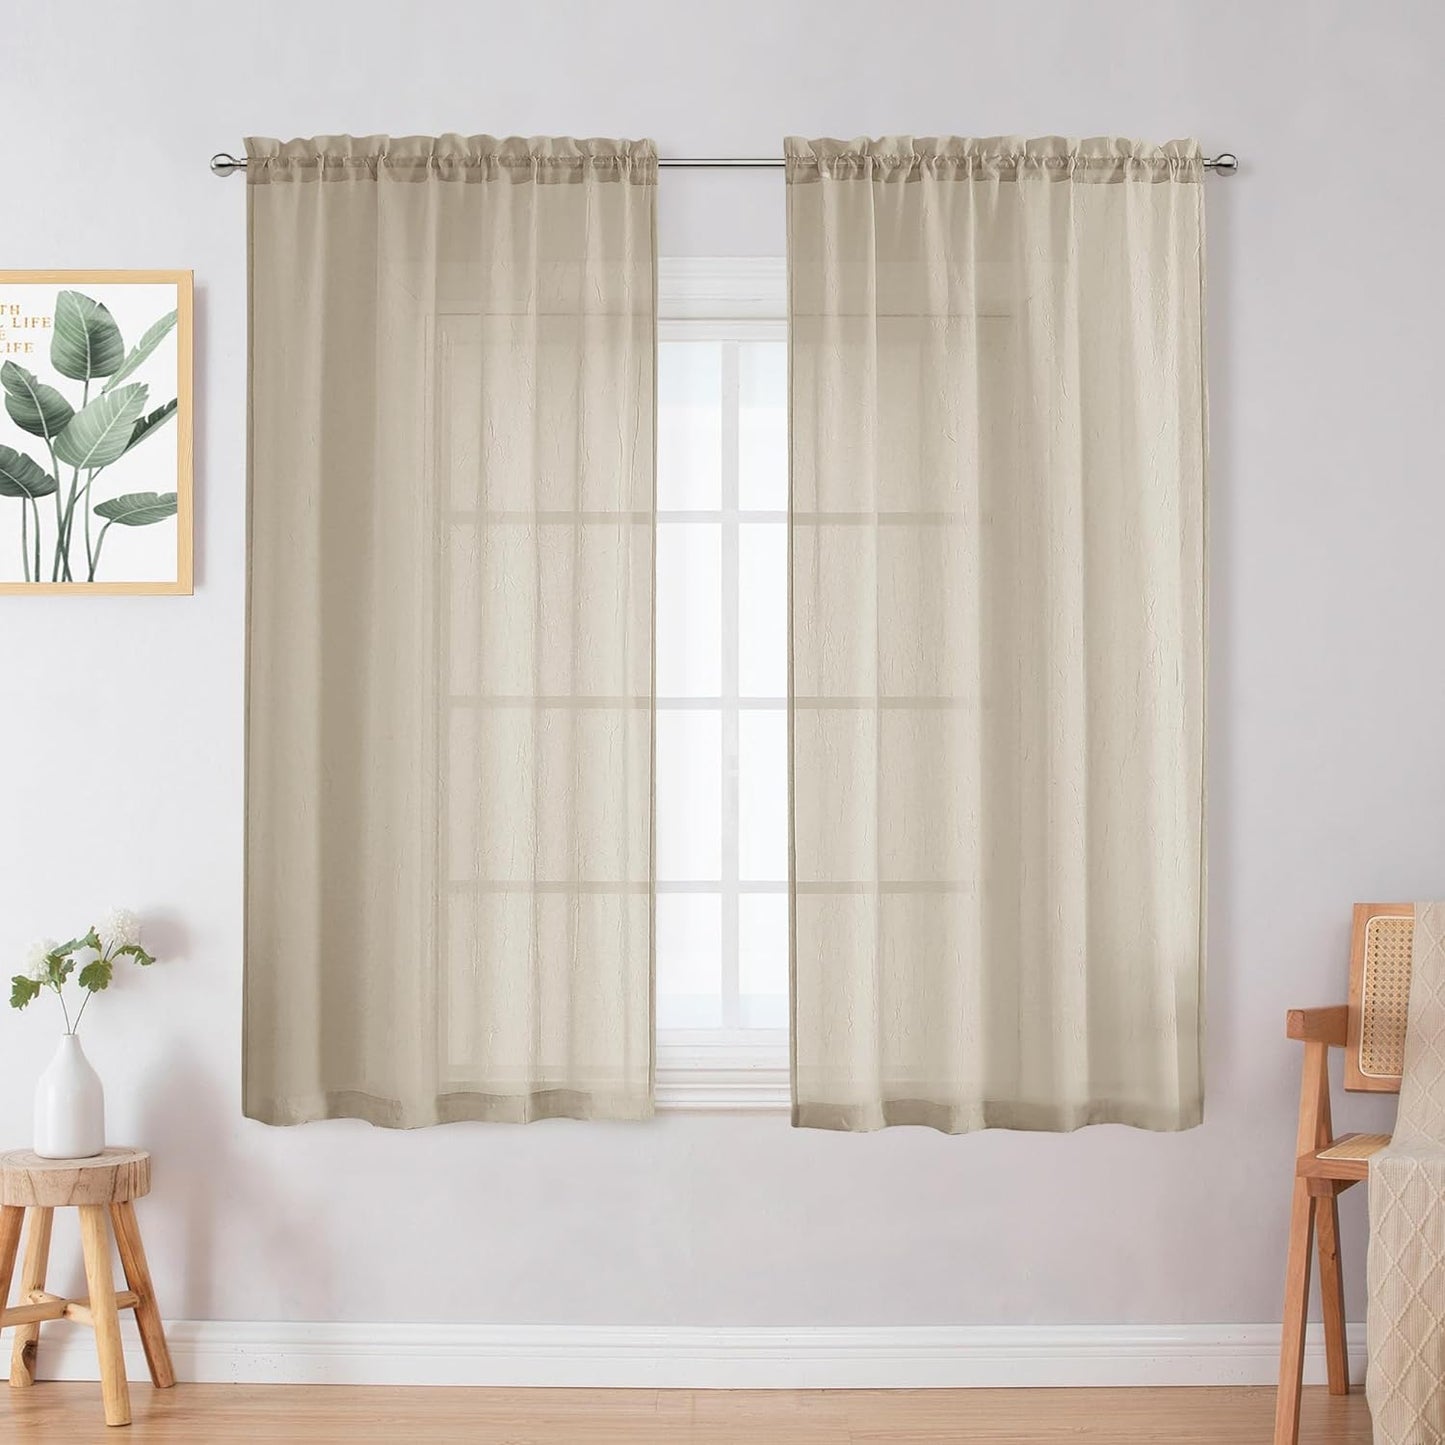 Crushed Sheer White Curtains 63 Inch Length 2 Panels, Light Filtering Solid Crinkle Voile Short Sheer Curtian for Bedroom Living Room, Each 42Wx63L Inches  Chyhomenyc Taupe 28 W X 45 L 